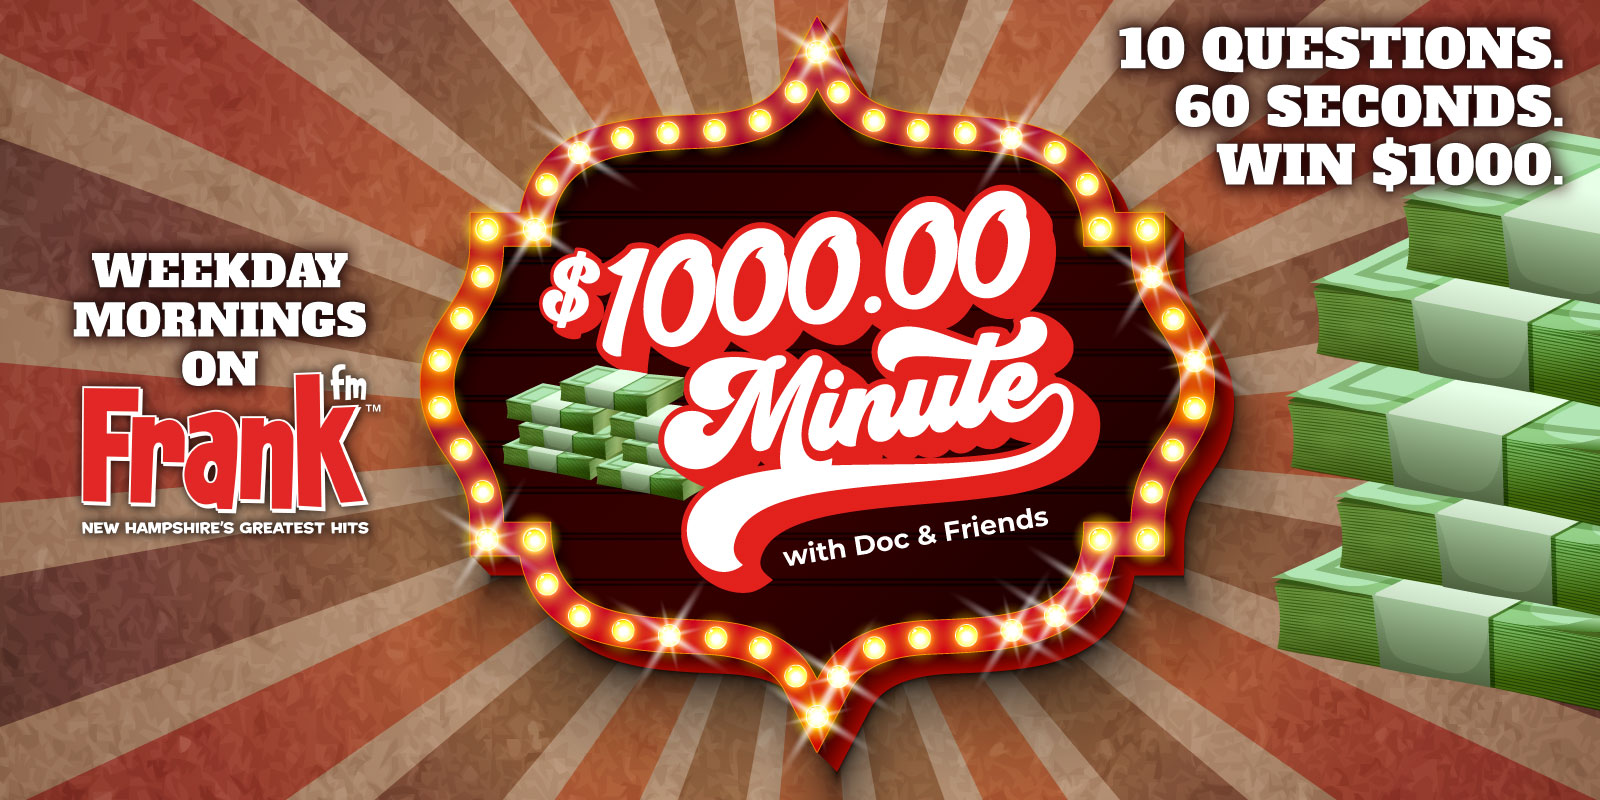 Play The $1,000 Minute! The Most Exciting 60 Seconds in Radio